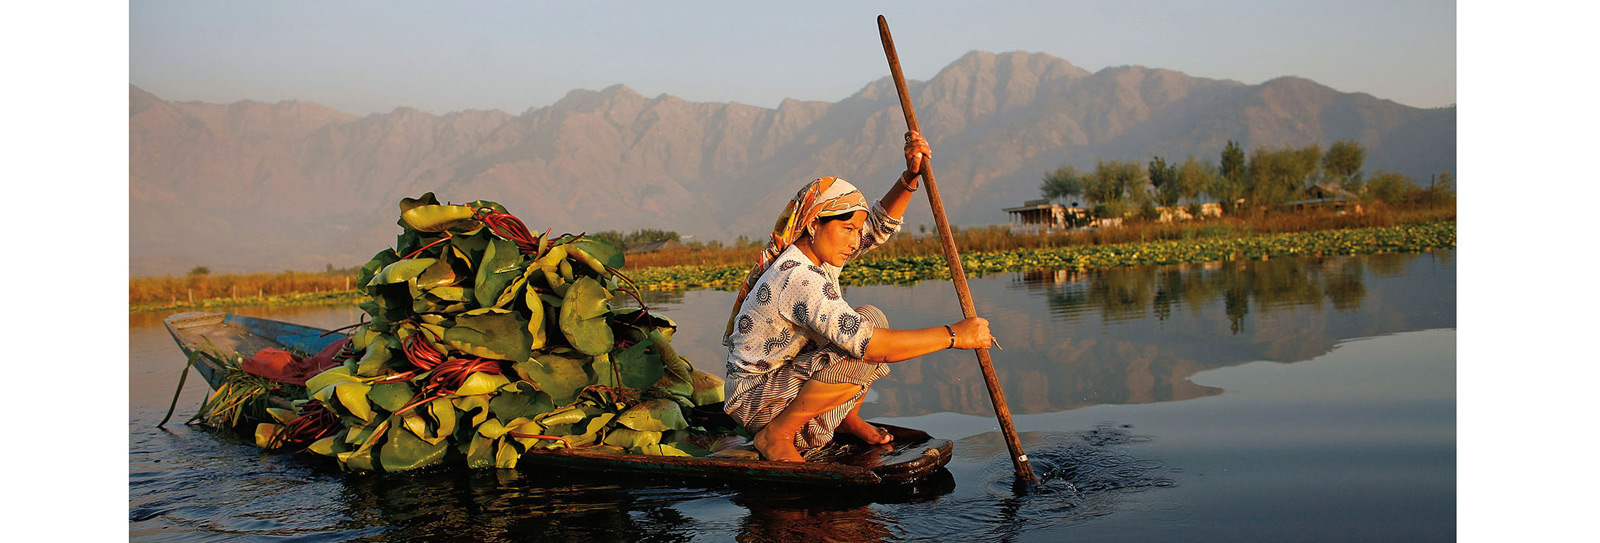 FirstLook: Removing Water Lilies from Dal Lake